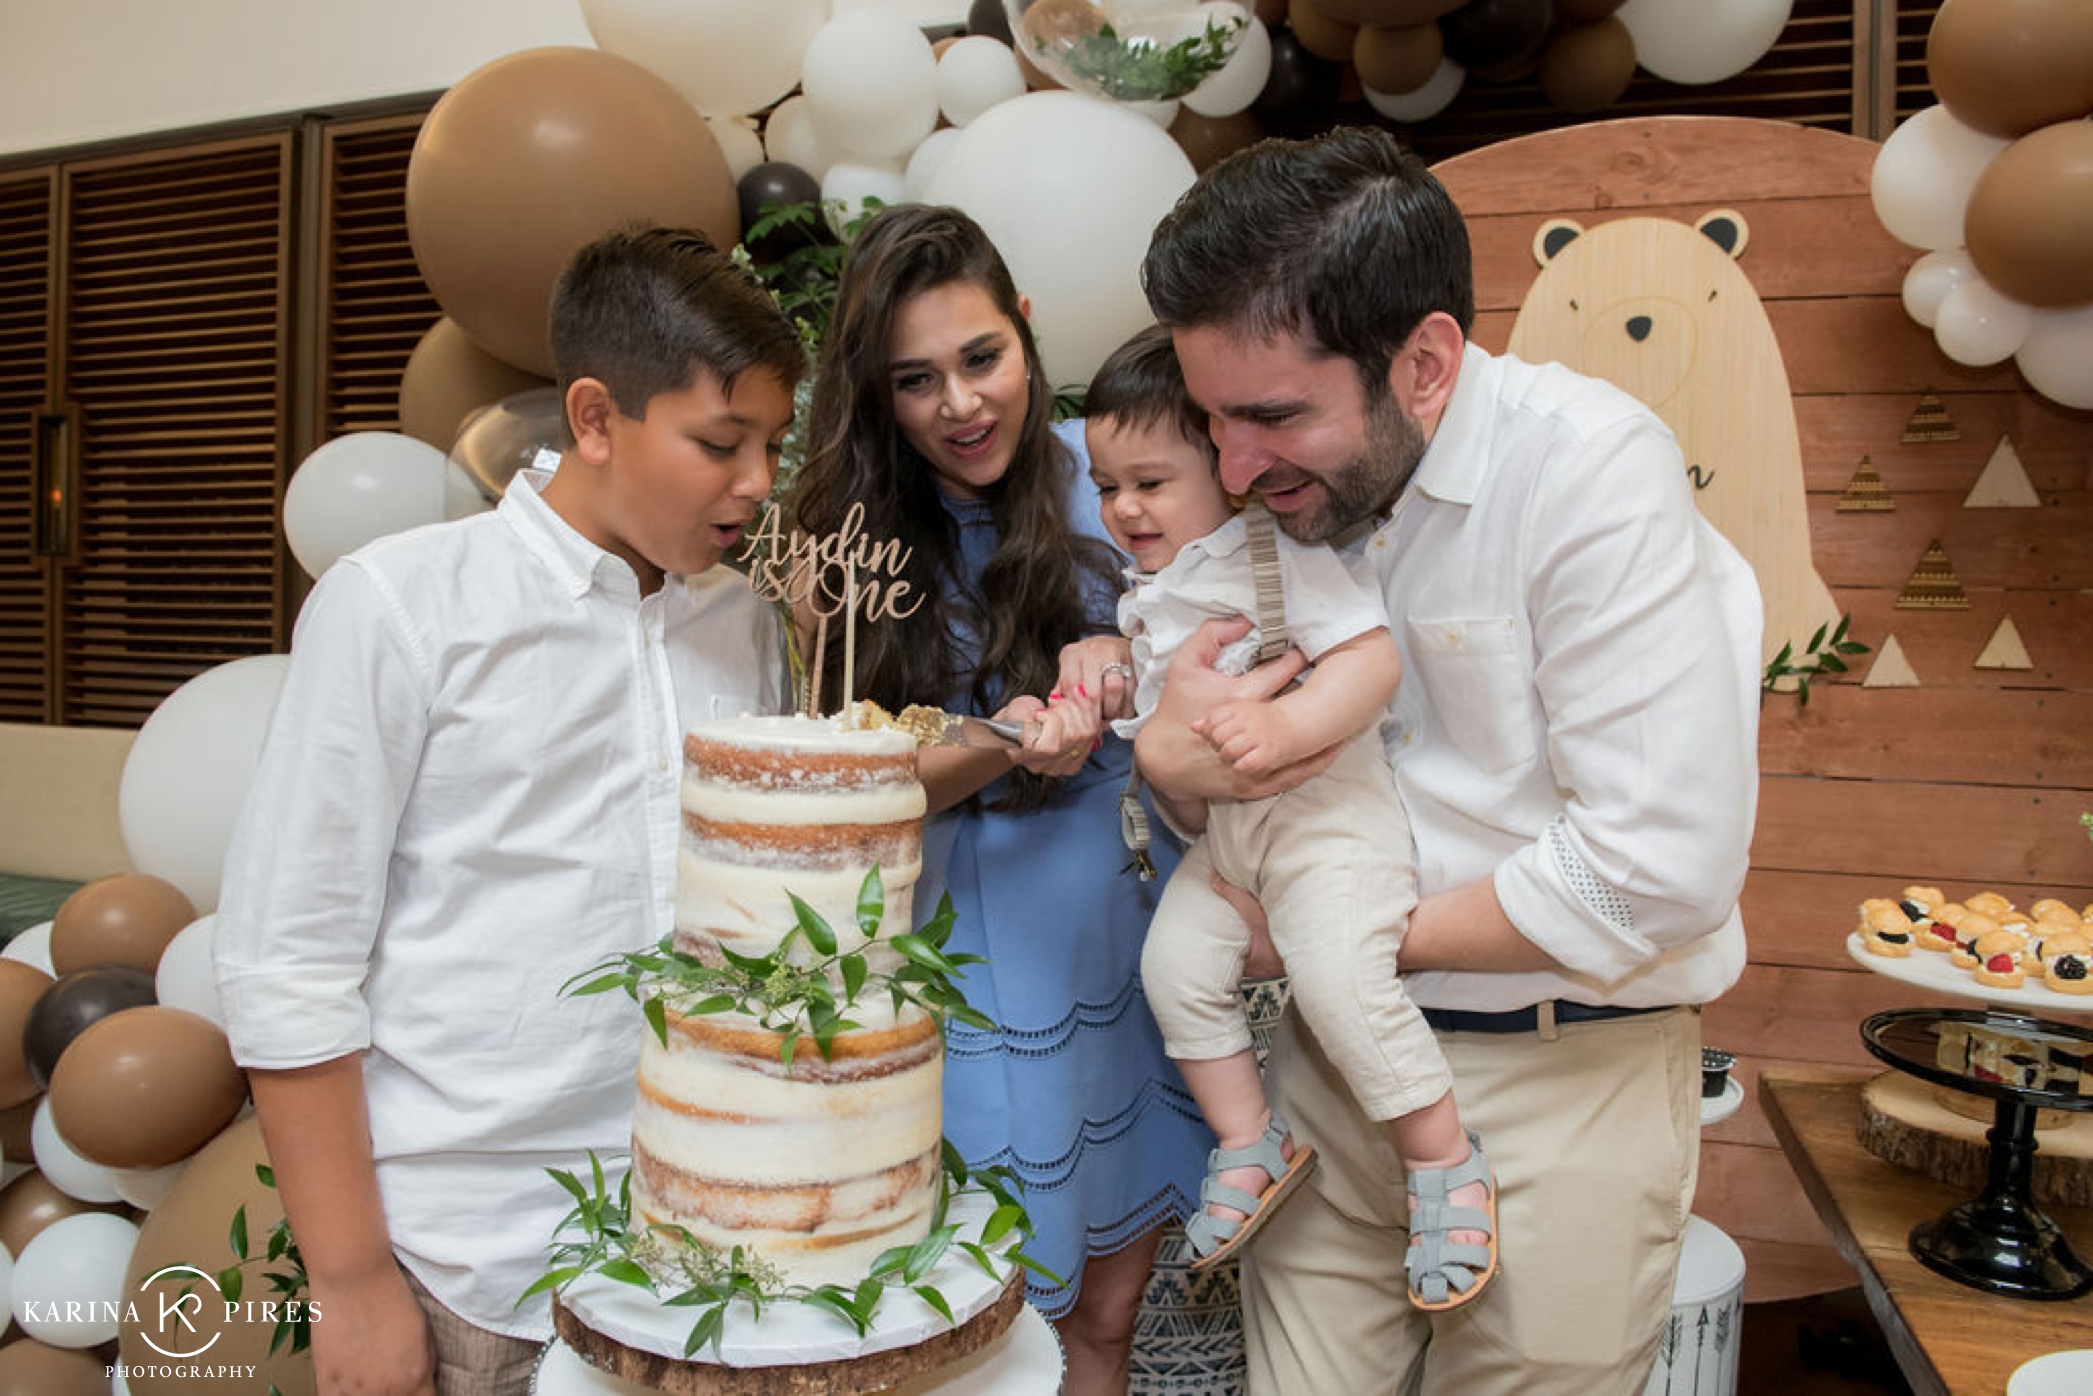 Aydin's First Birthday Party photographed by Karina Pires Photography